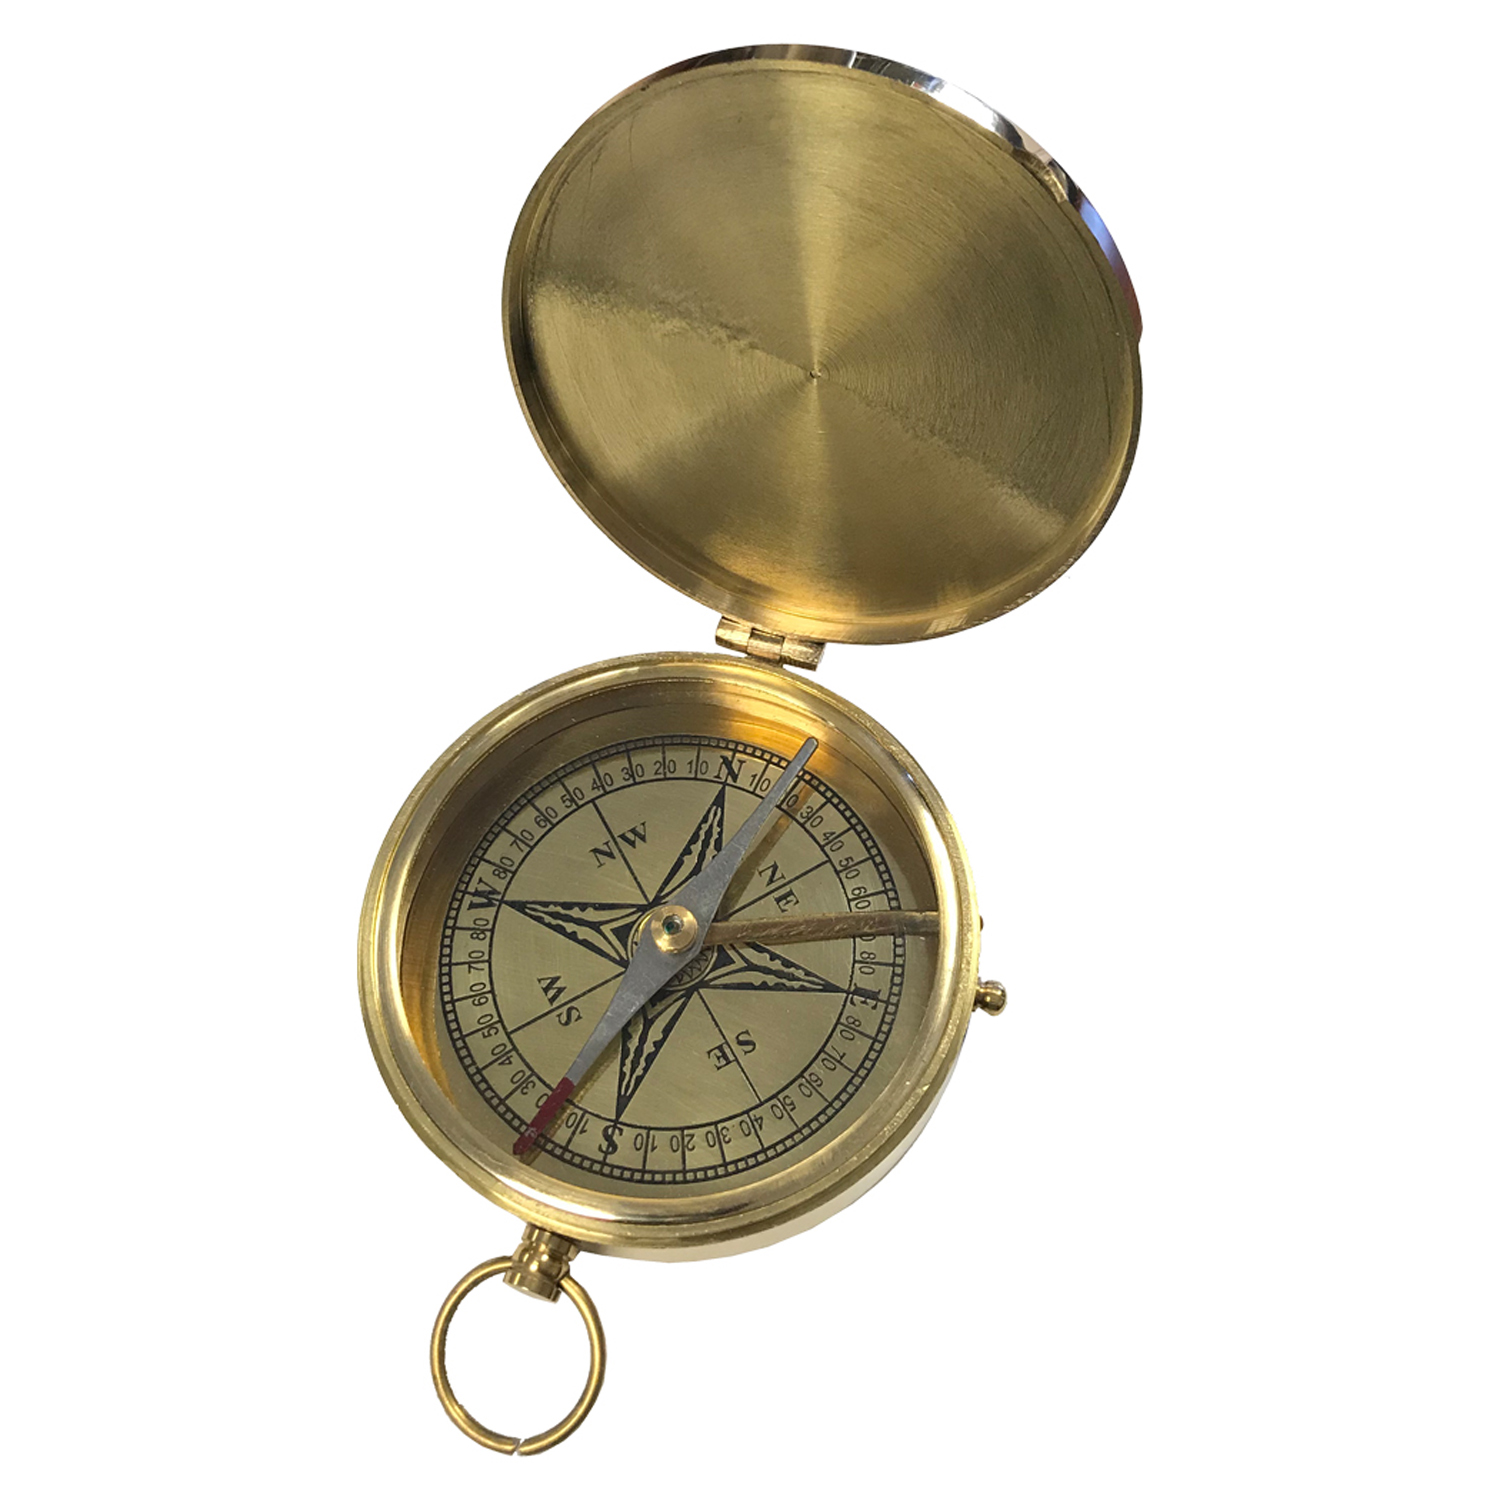 3 Flip-Top Solid Polished Brass Pocket Compass Antique Reproduction -  Schooner Bay Company